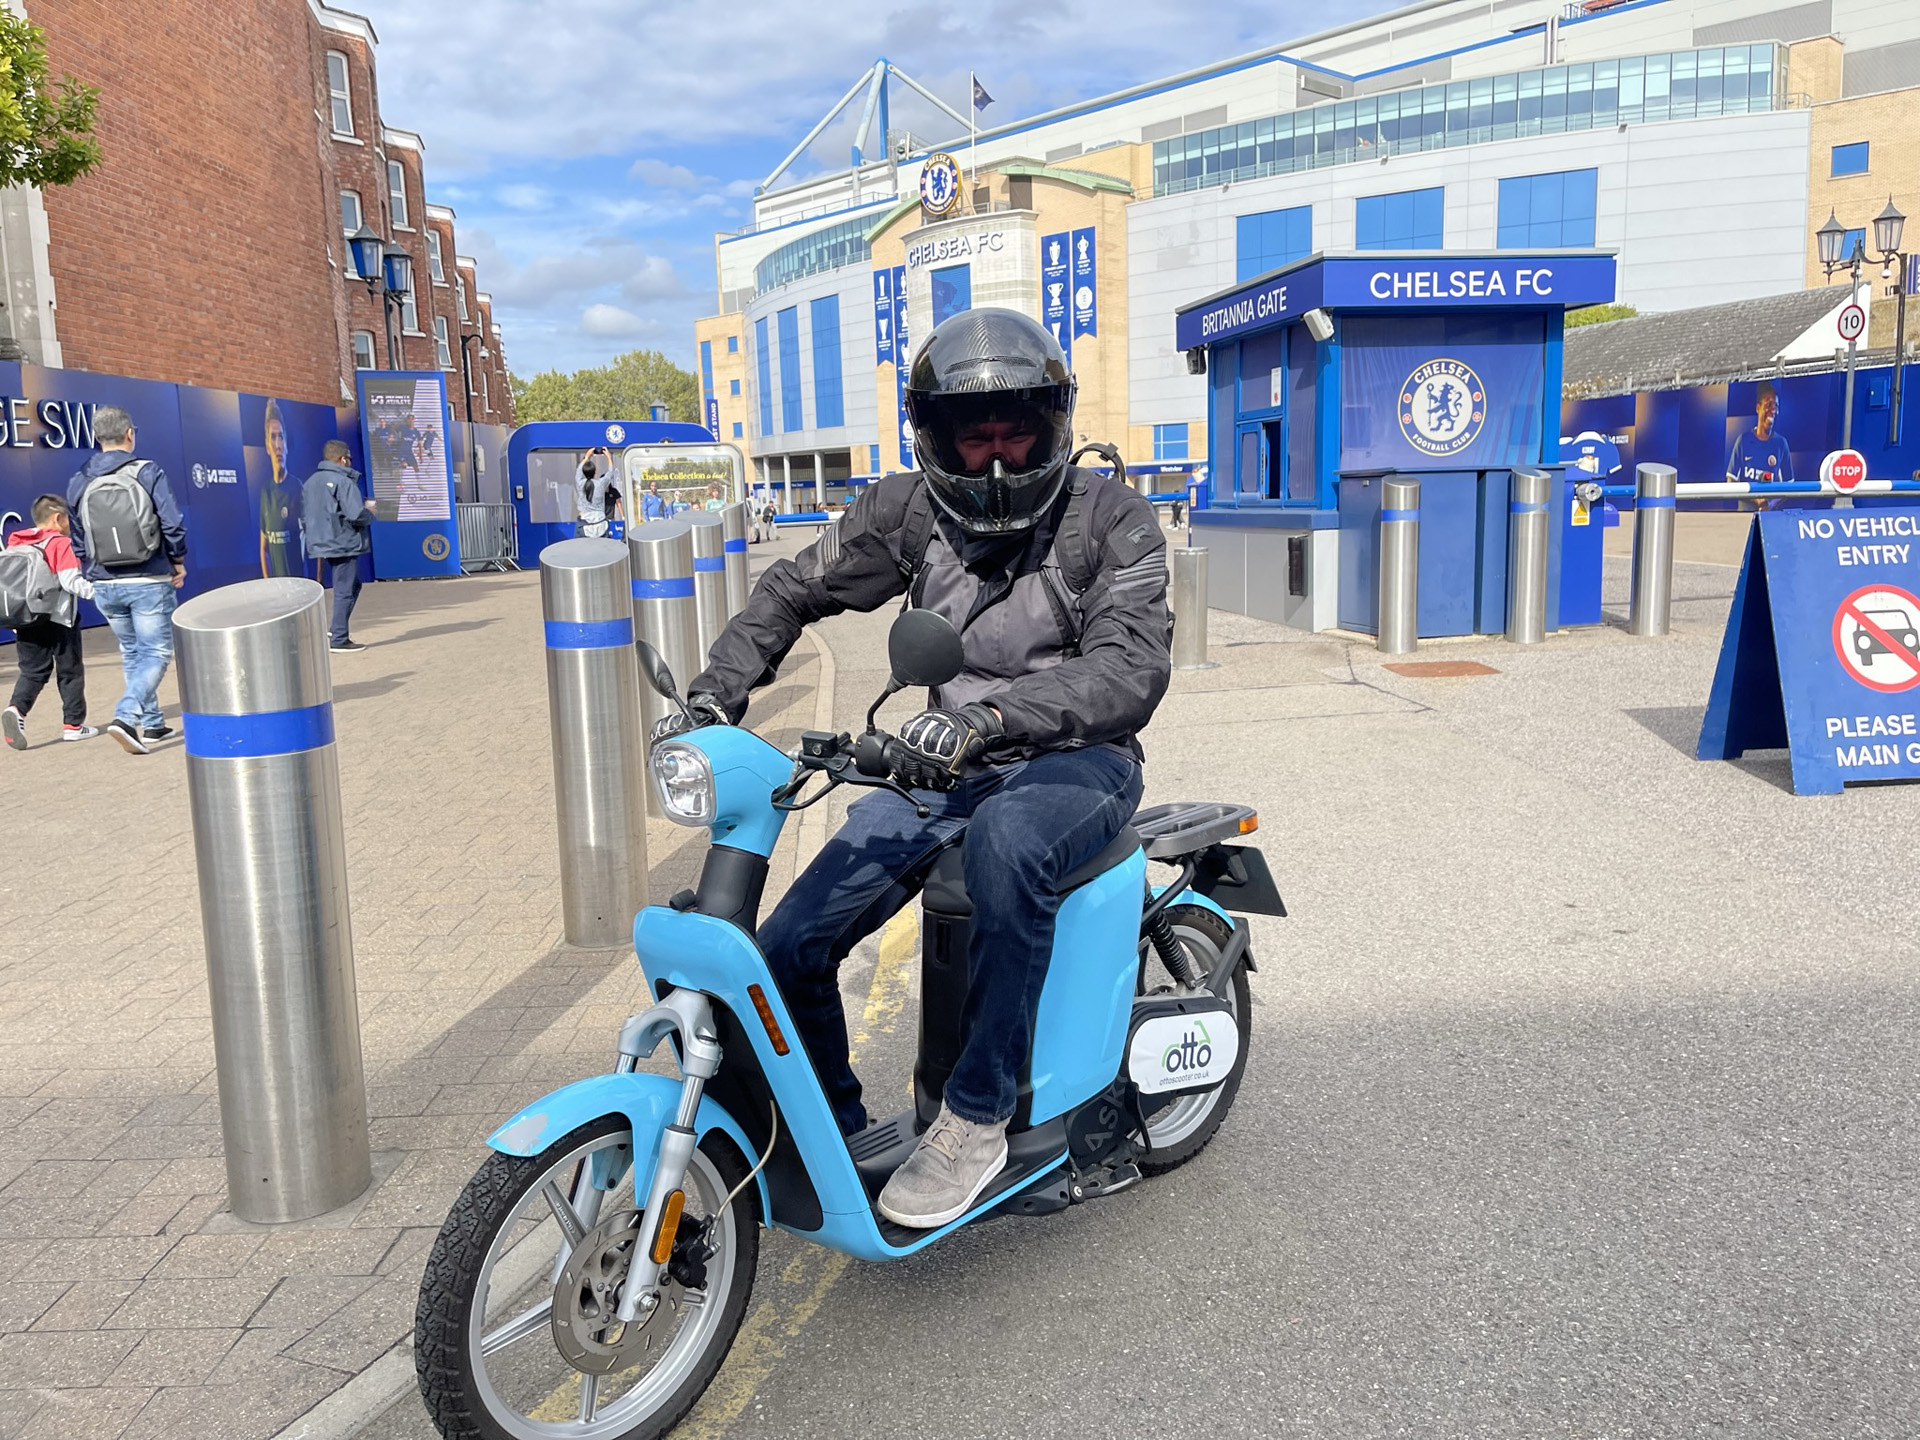 Askoll eSpro 70 at Stamford Bridge, Chelsea FC. Alex on the electric scooter wearing a Ruroc Atlas 4